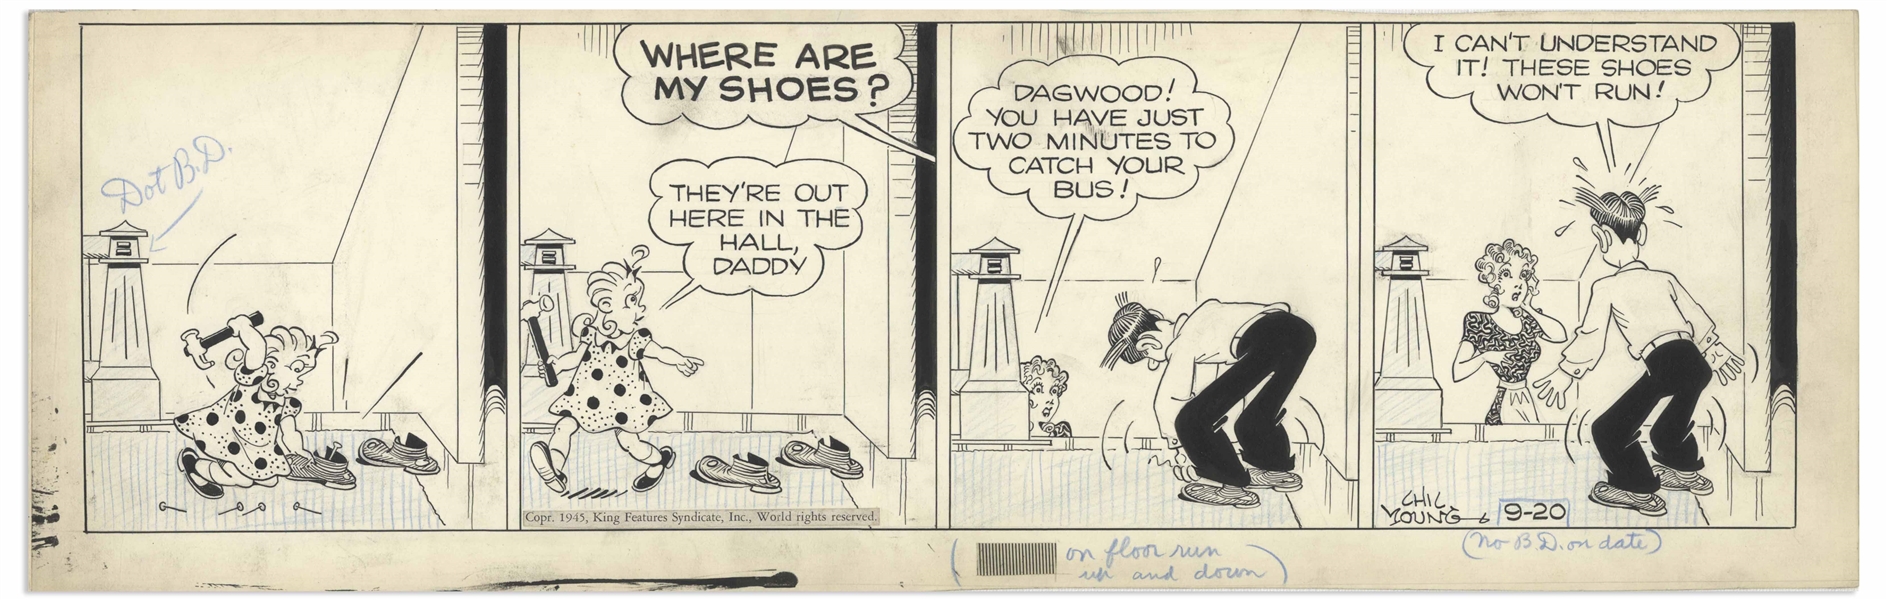 Chic Young Hand-Drawn ''Blondie'' Comic Strip From 1945 Titled ''Run, Shoes, Run!'' -- Dagwood Can't Leave the House Without His Shoes